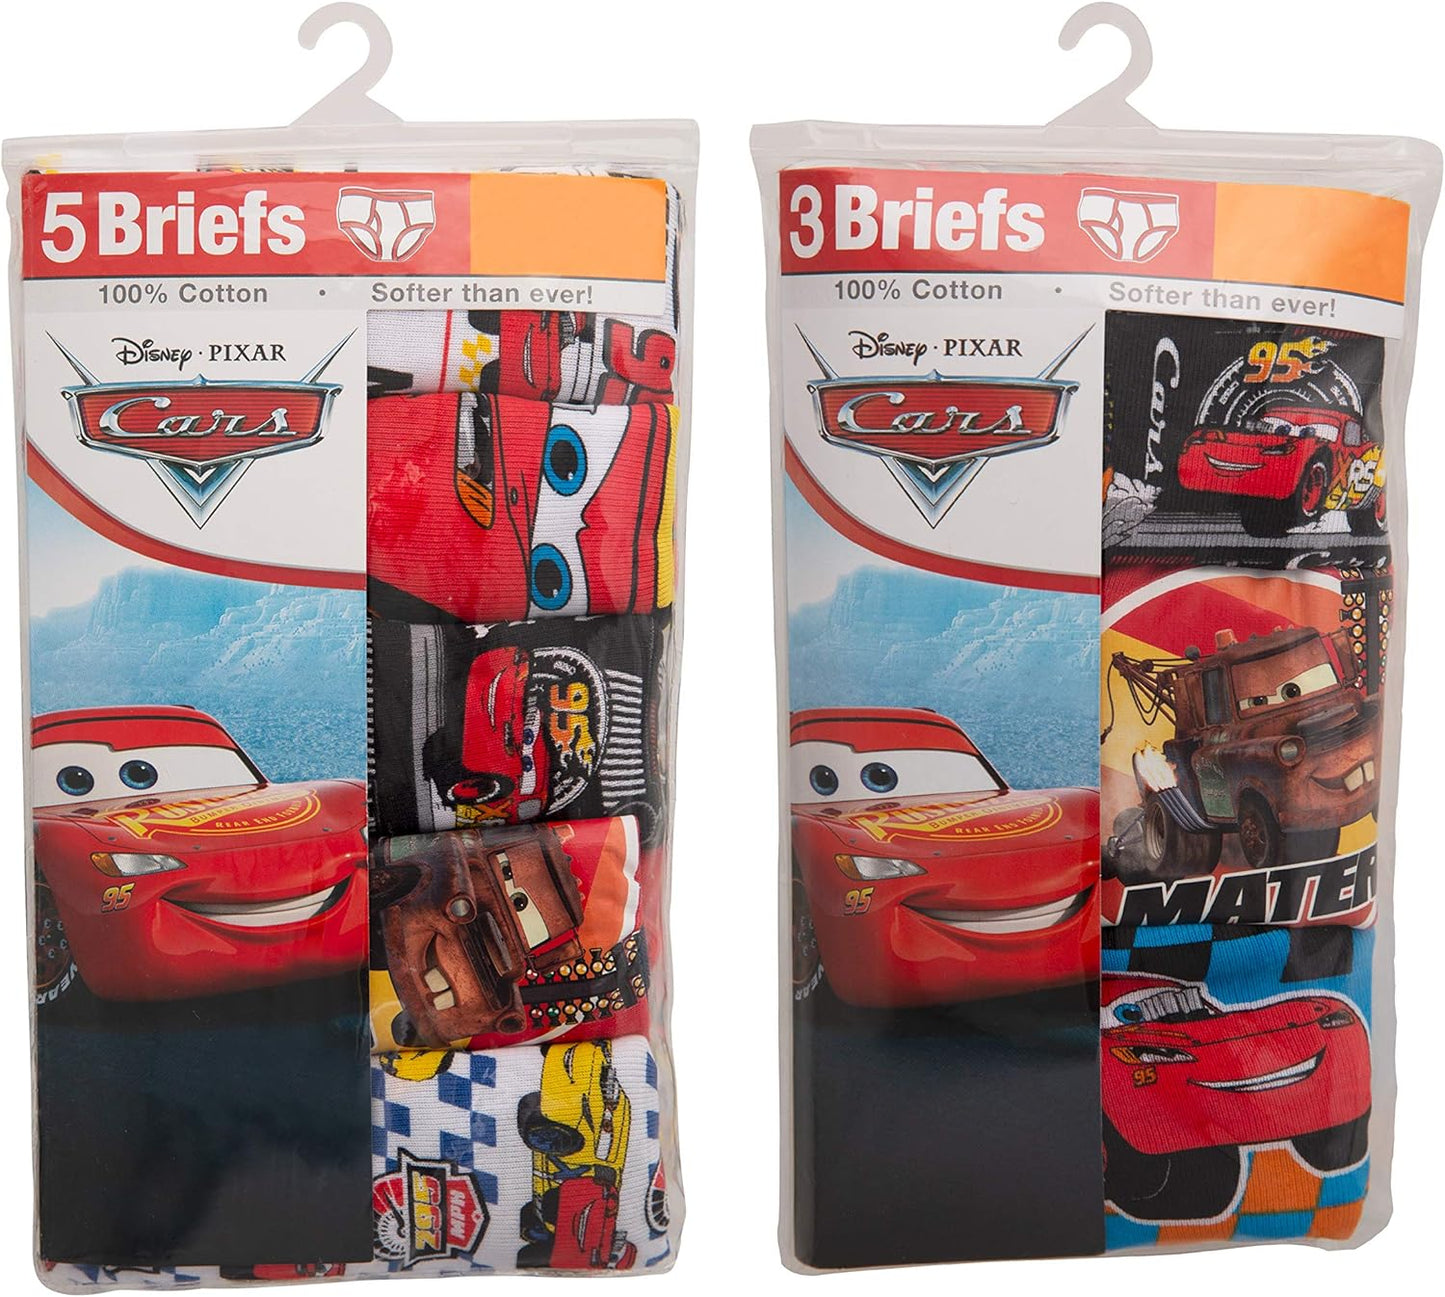 Disney Boys' Pixar Cars 100% Cotton Underwear with Lightning McQueen, Mater, Cruz & More Sizes 18m, 2/3t, 4t, 4, 6 and 8